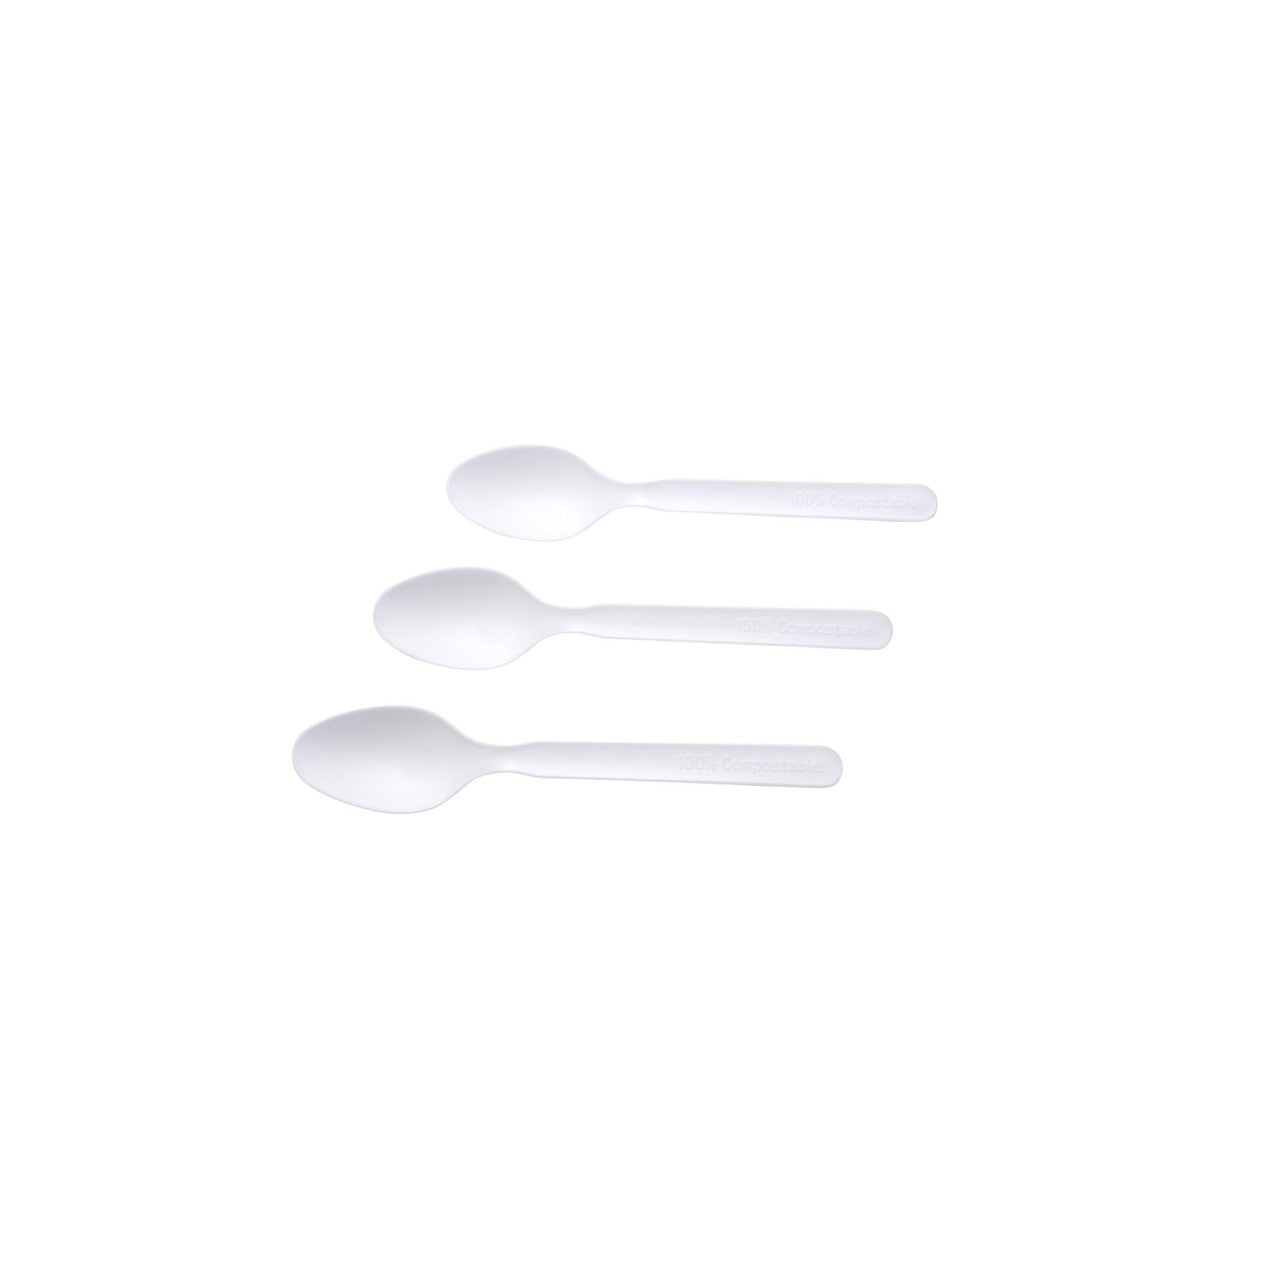 Repurpose Compostable, High Heat Spoons 20 X 24ct-1